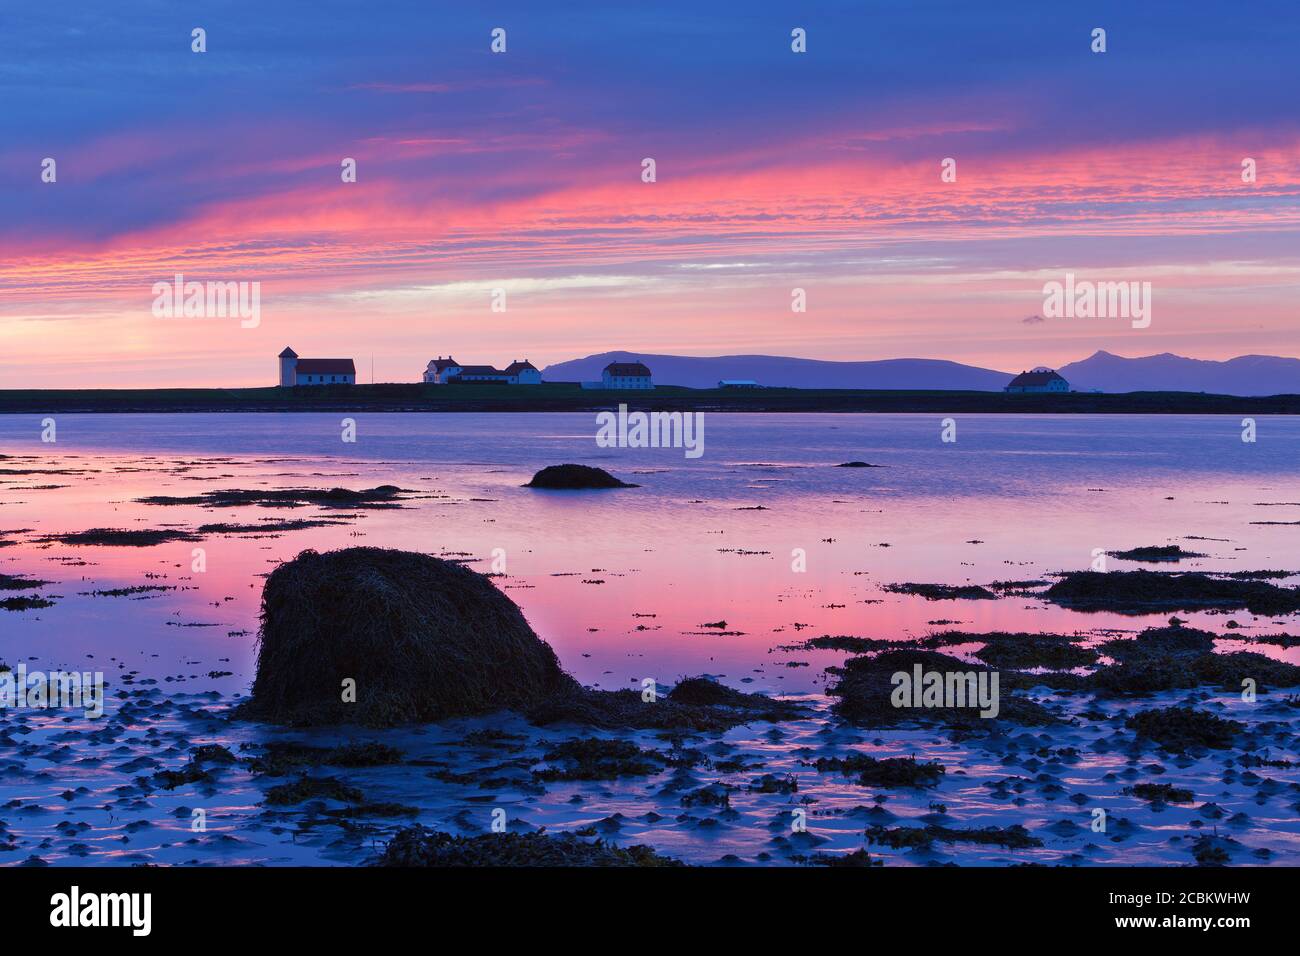 Rocky landscape and presidents residence building in remote setting at sunset, Bessastadir, Alftanes, Iceland Stock Photo